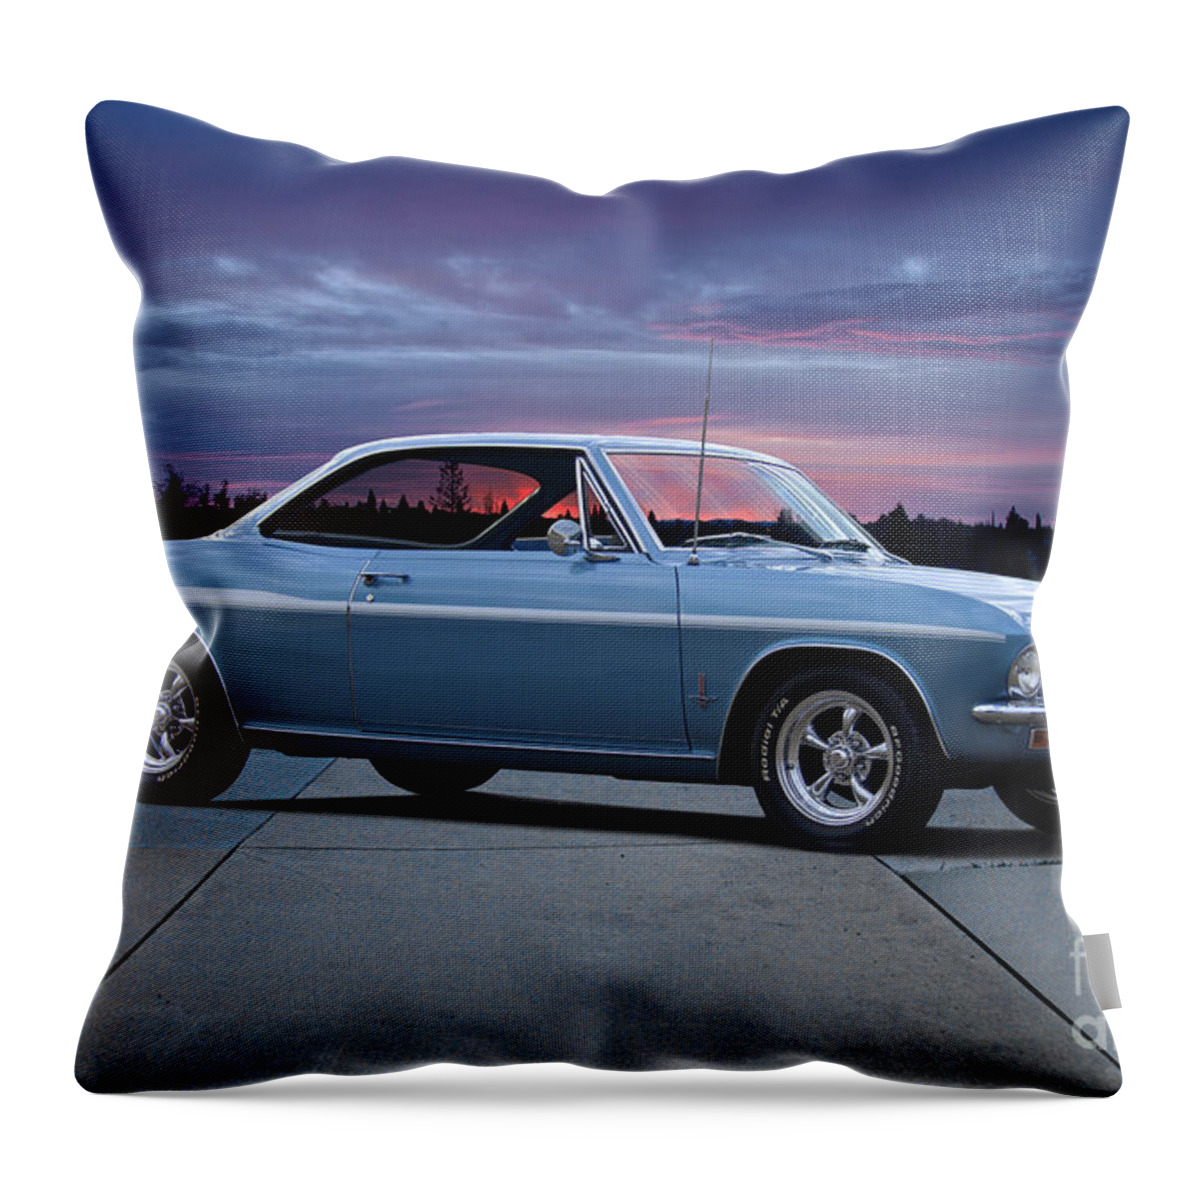 Automobile Throw Pillow featuring the photograph 1965 Corvair Monza by Dave Koontz